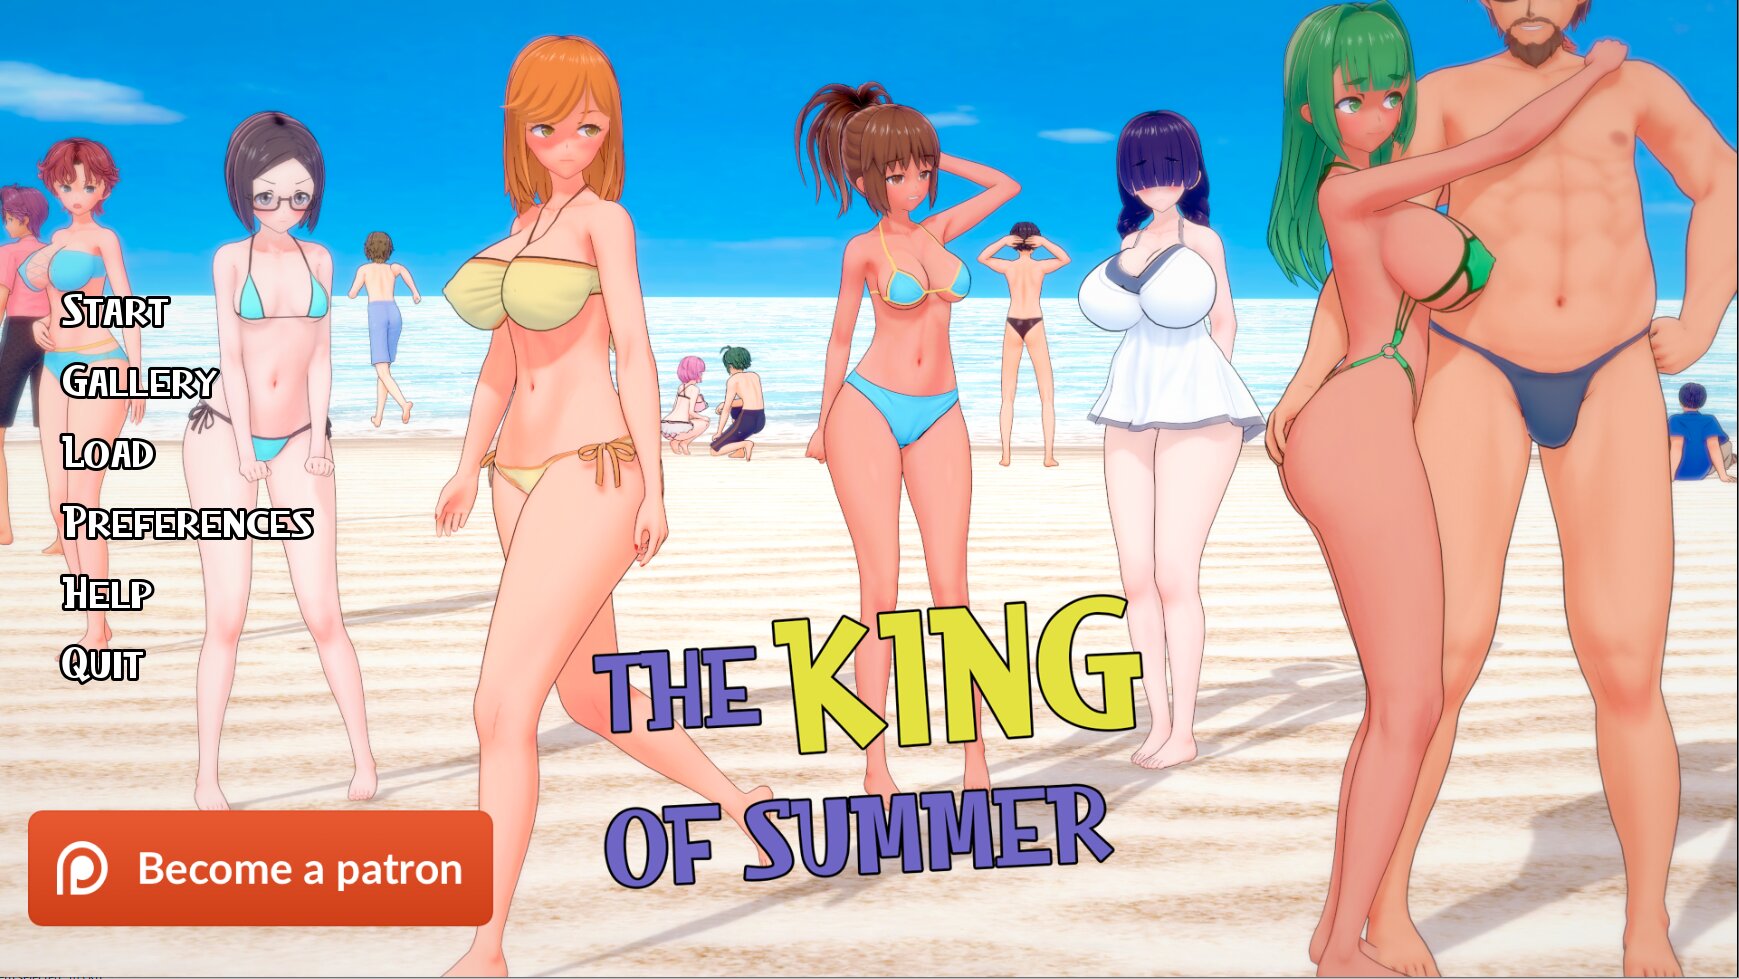 Adultgamesworld Free Porn Games and Sex Games » The King of Summer pic